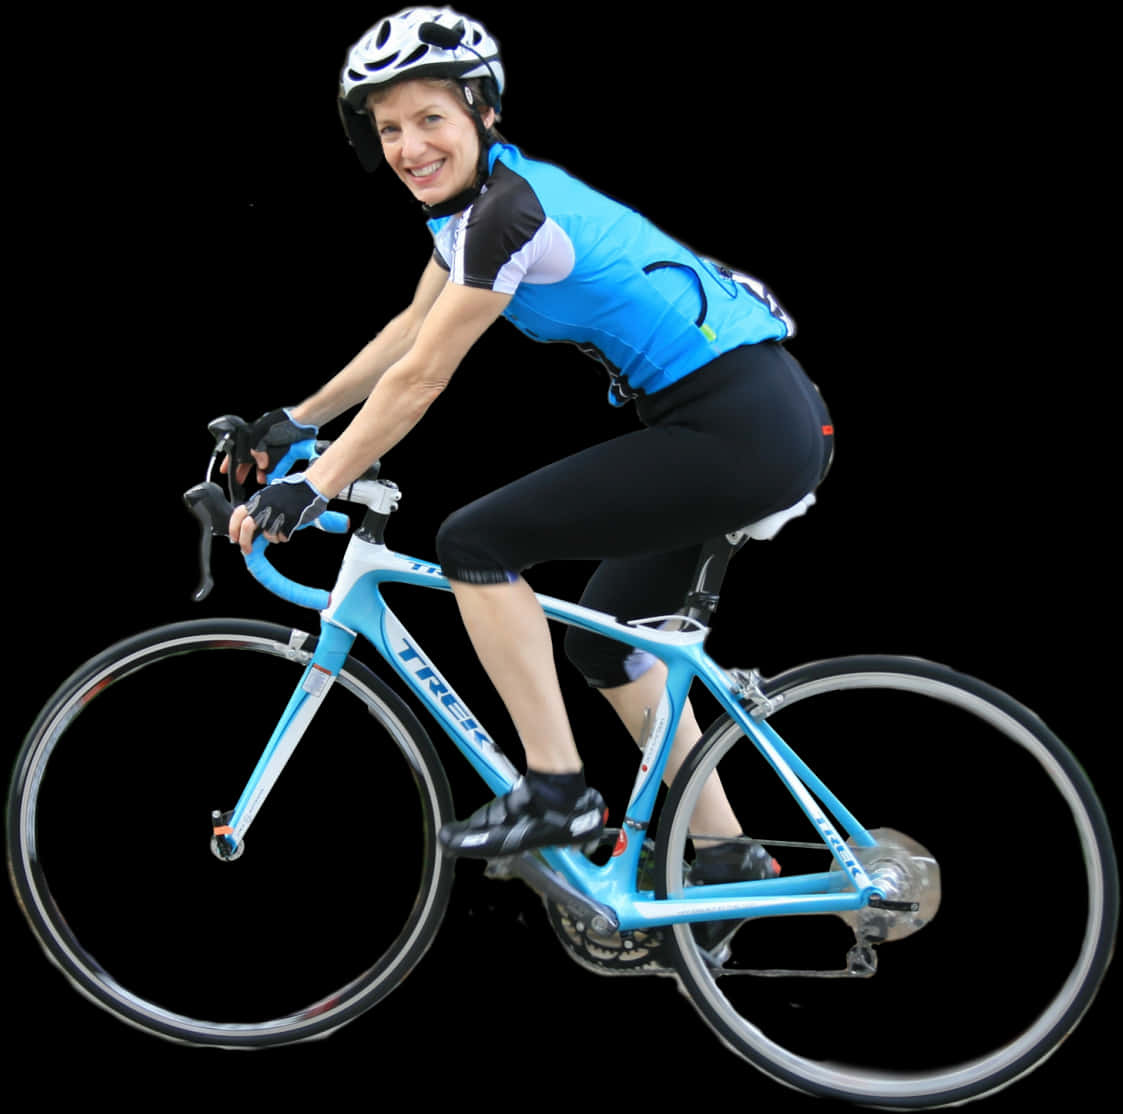 Woman On Bicycle Png Image - Bike Riding Transparent Background, Png Download